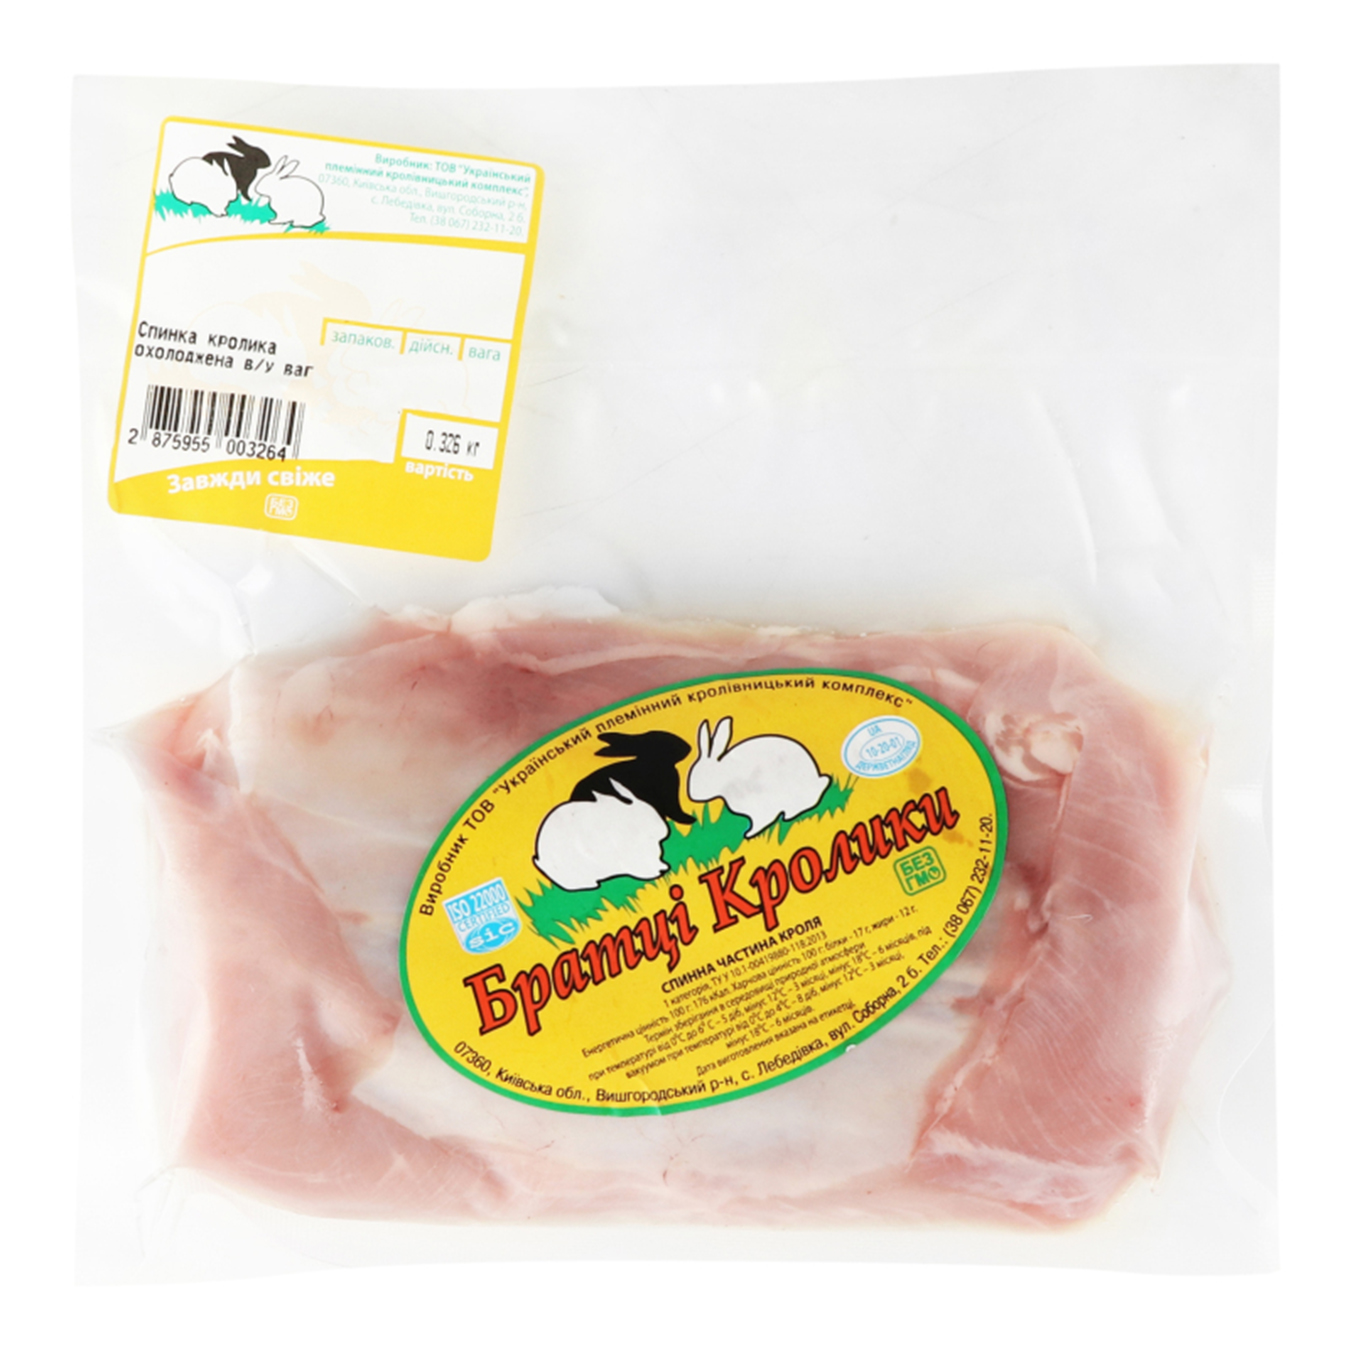 Bratsi Rabbit back chilled 400-600 grams in a package